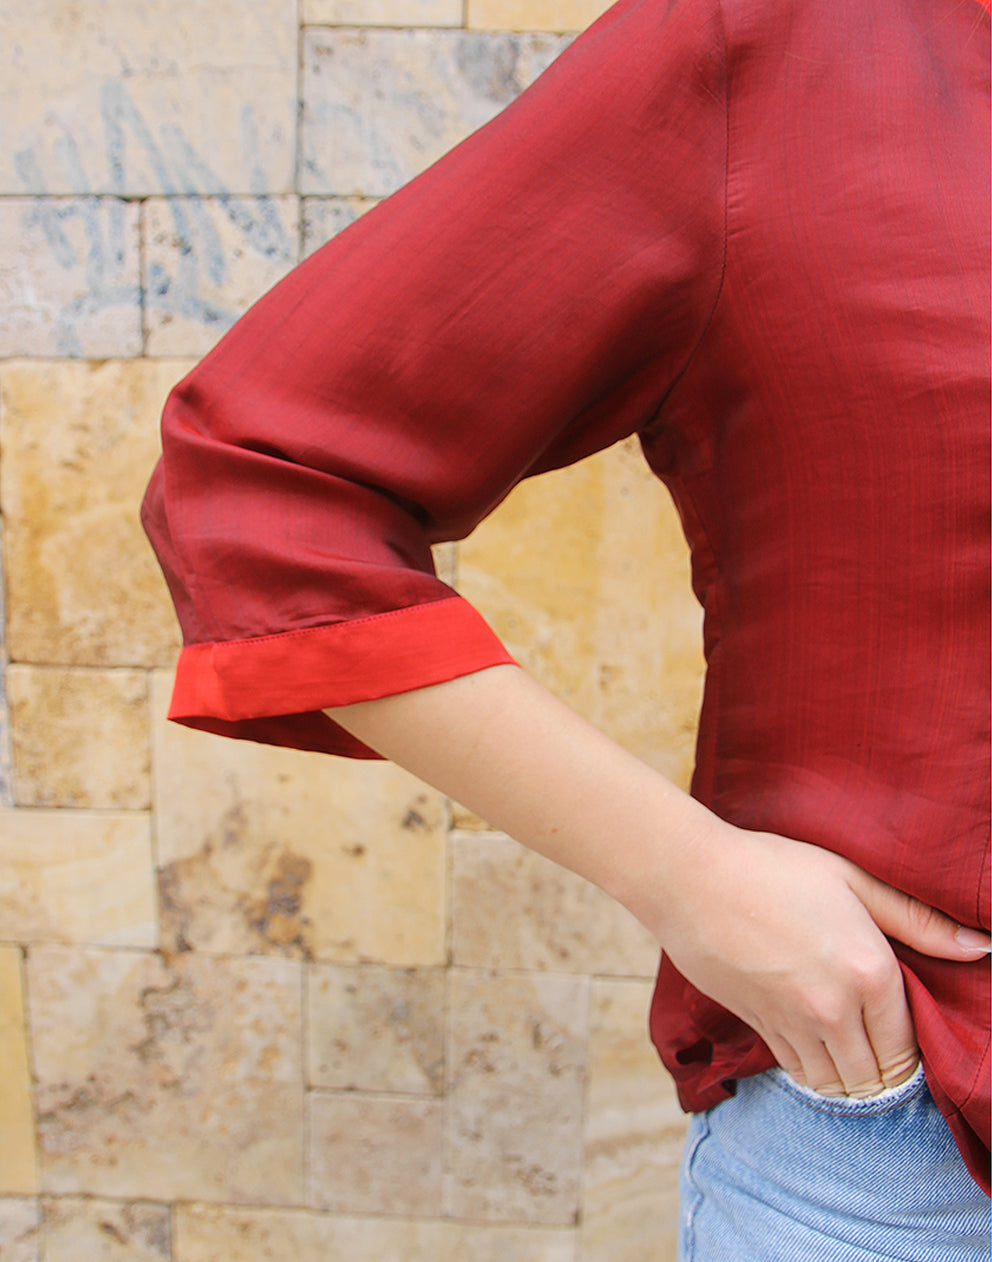 Silk Shirt in Red with Embroidery